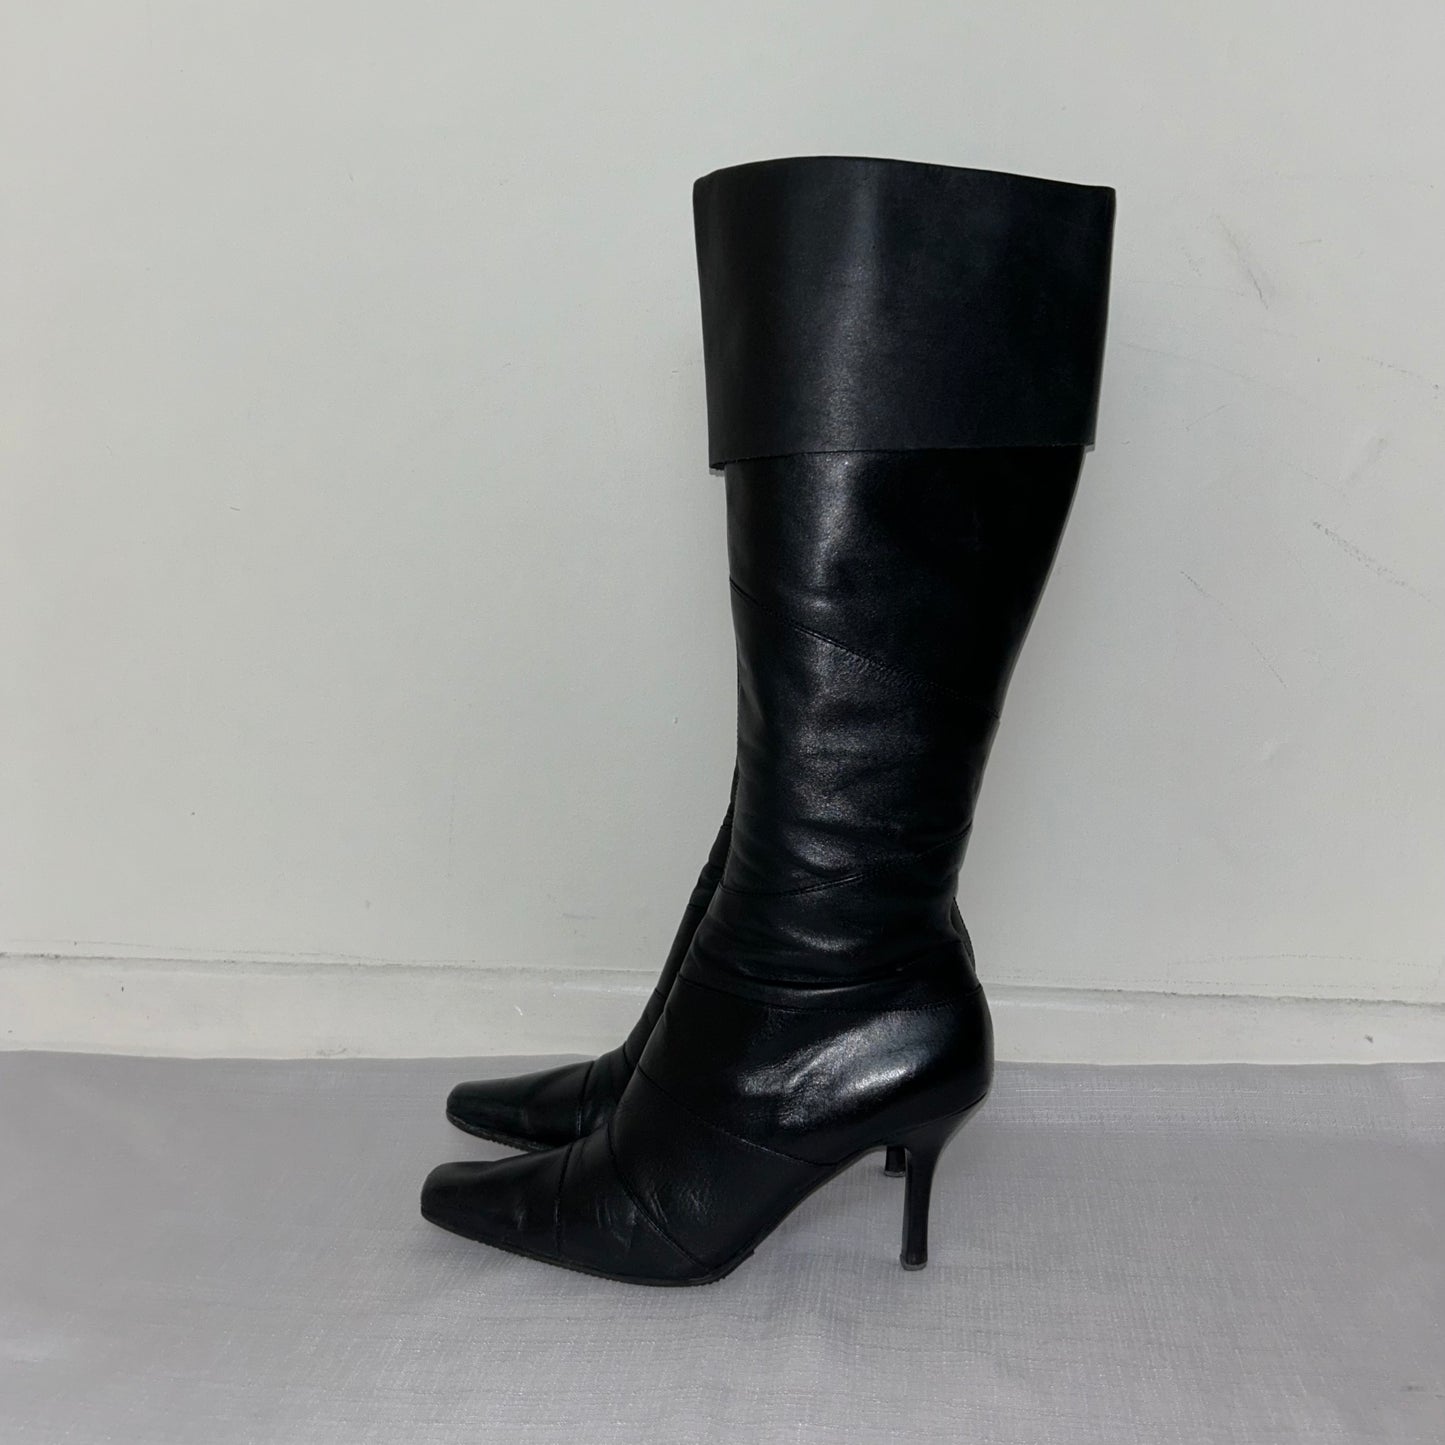 black knee high leather boots shown on a white background